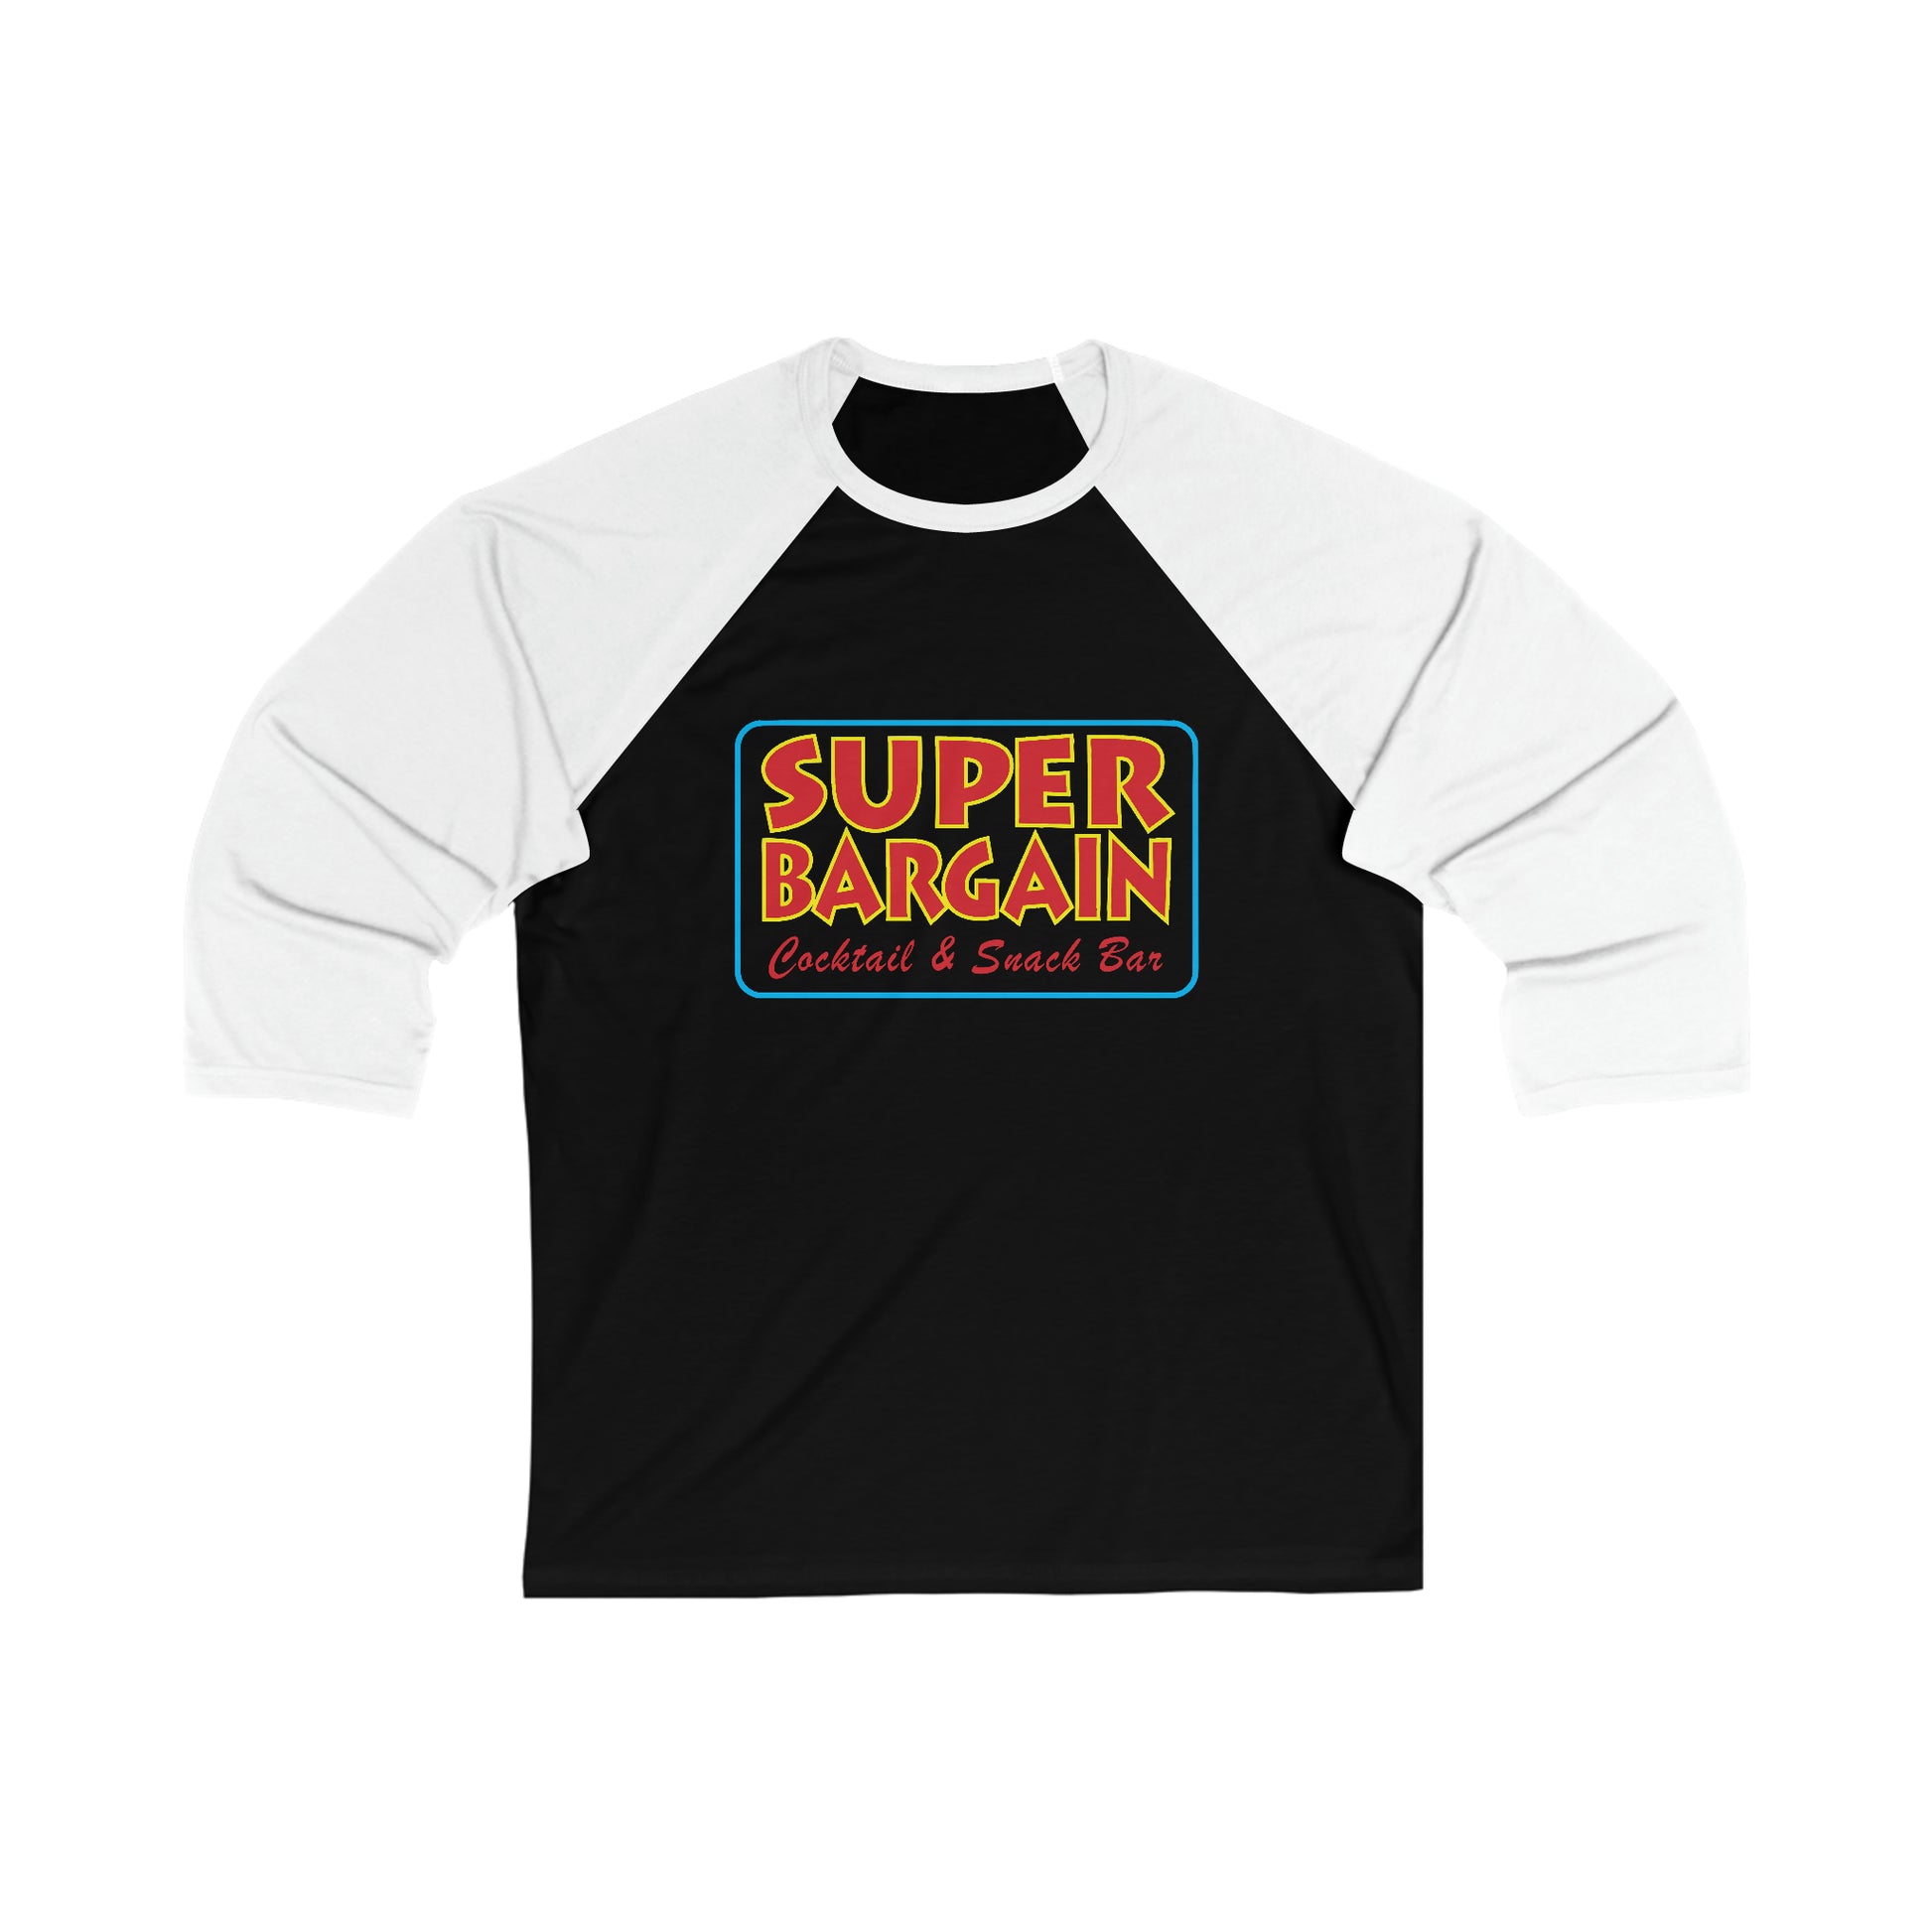 Raglan baseball t-shirt with black torso and white sleeves, featuring a colorful retro design that reads "Toronto Super Bargain, Cocktail & Snack Bar" in stylized fonts on the chest.